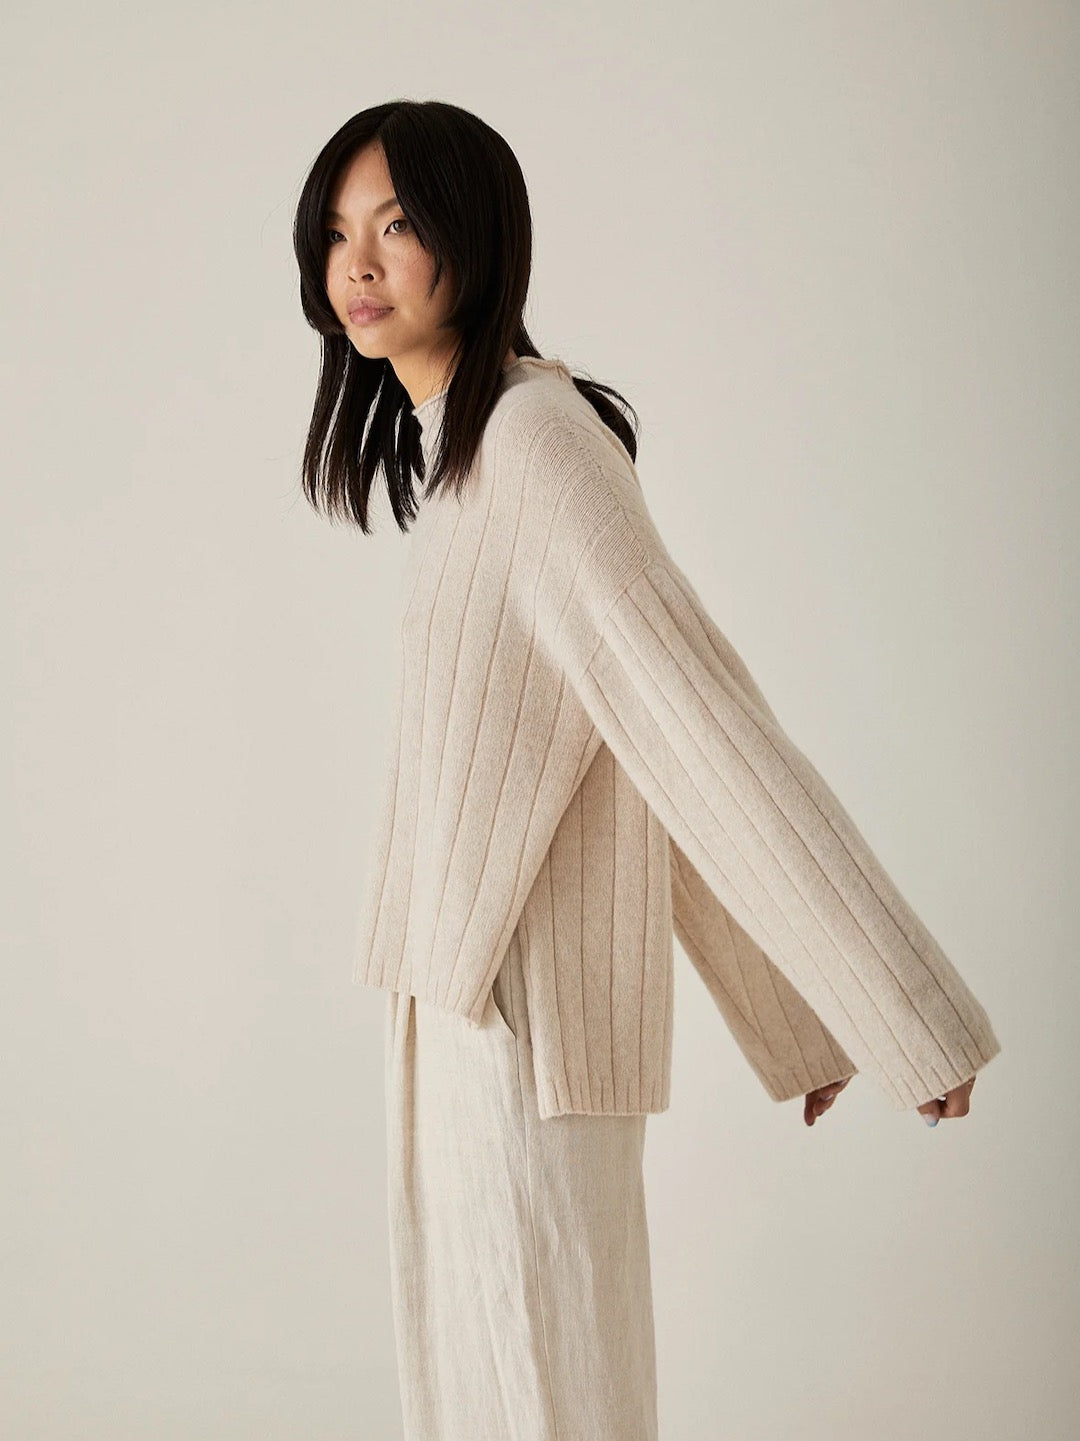 The model is wearing an oversized Echo Knit – Creme sweater and white pants, both crafted from Italian air-spun merino by Francie.